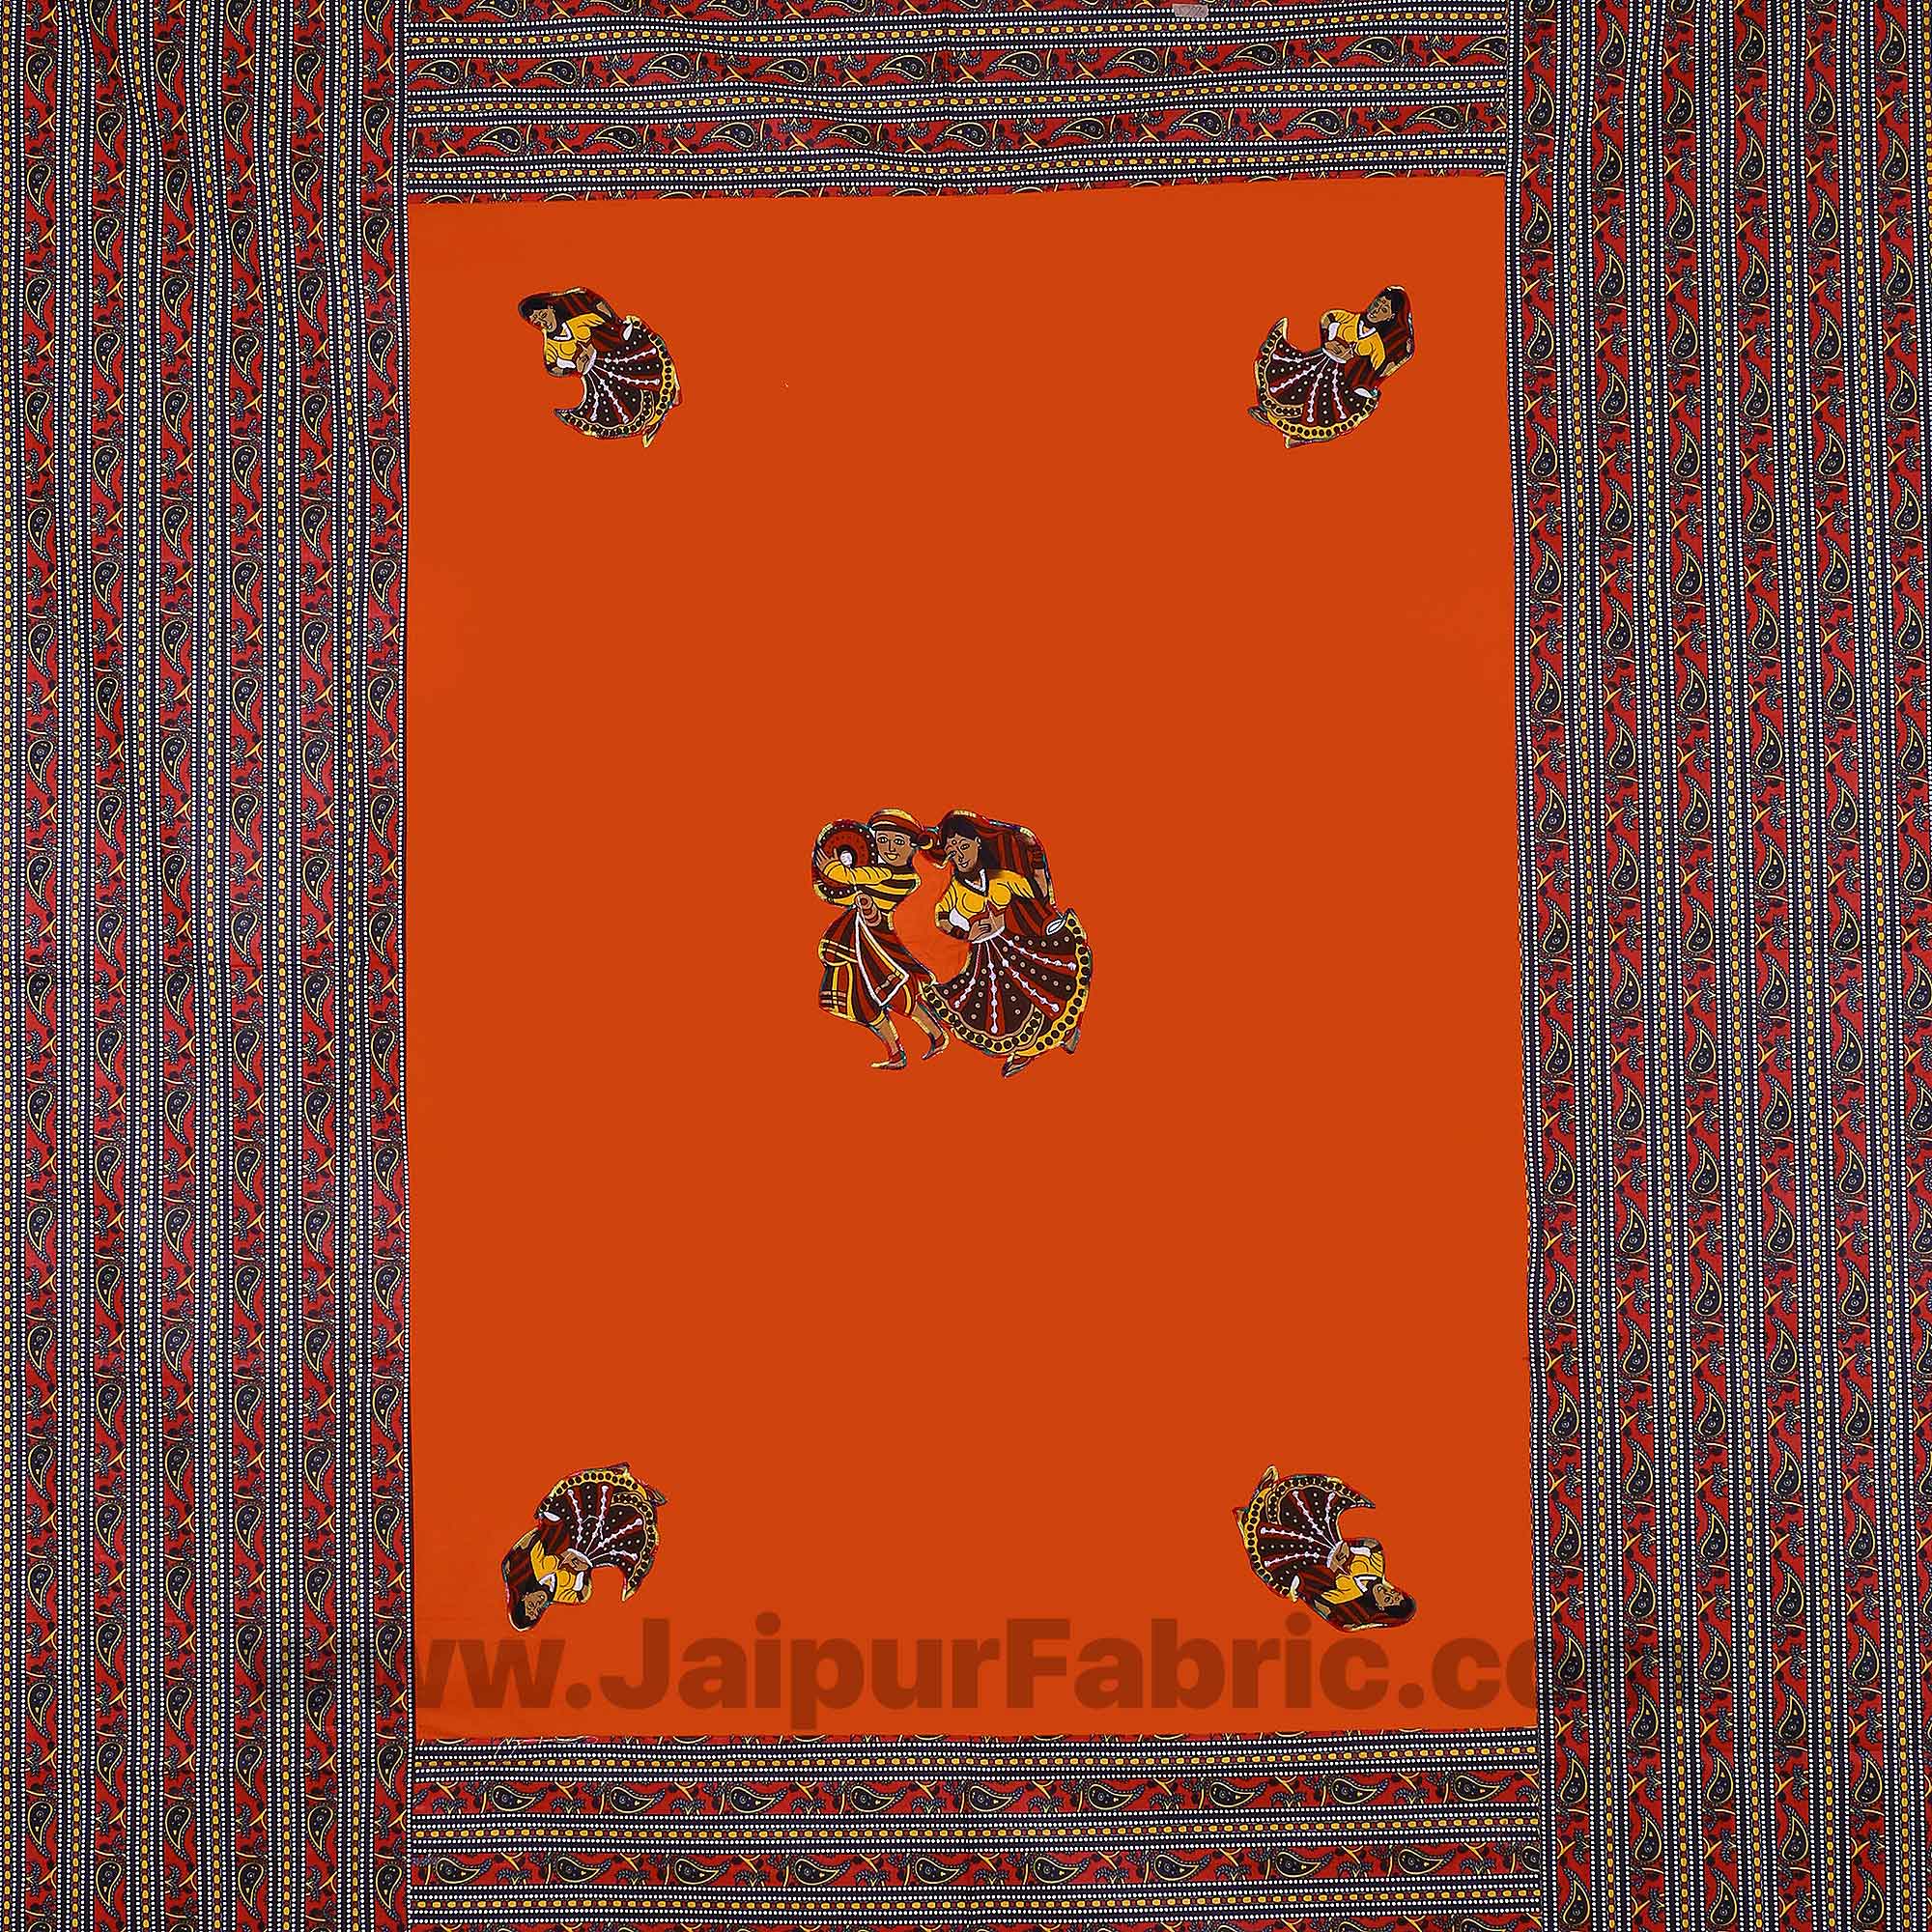 Applique Orange Rajasthani Dance Jaipuri  Hand Made Embroidery Patch Work Double Bedsheet